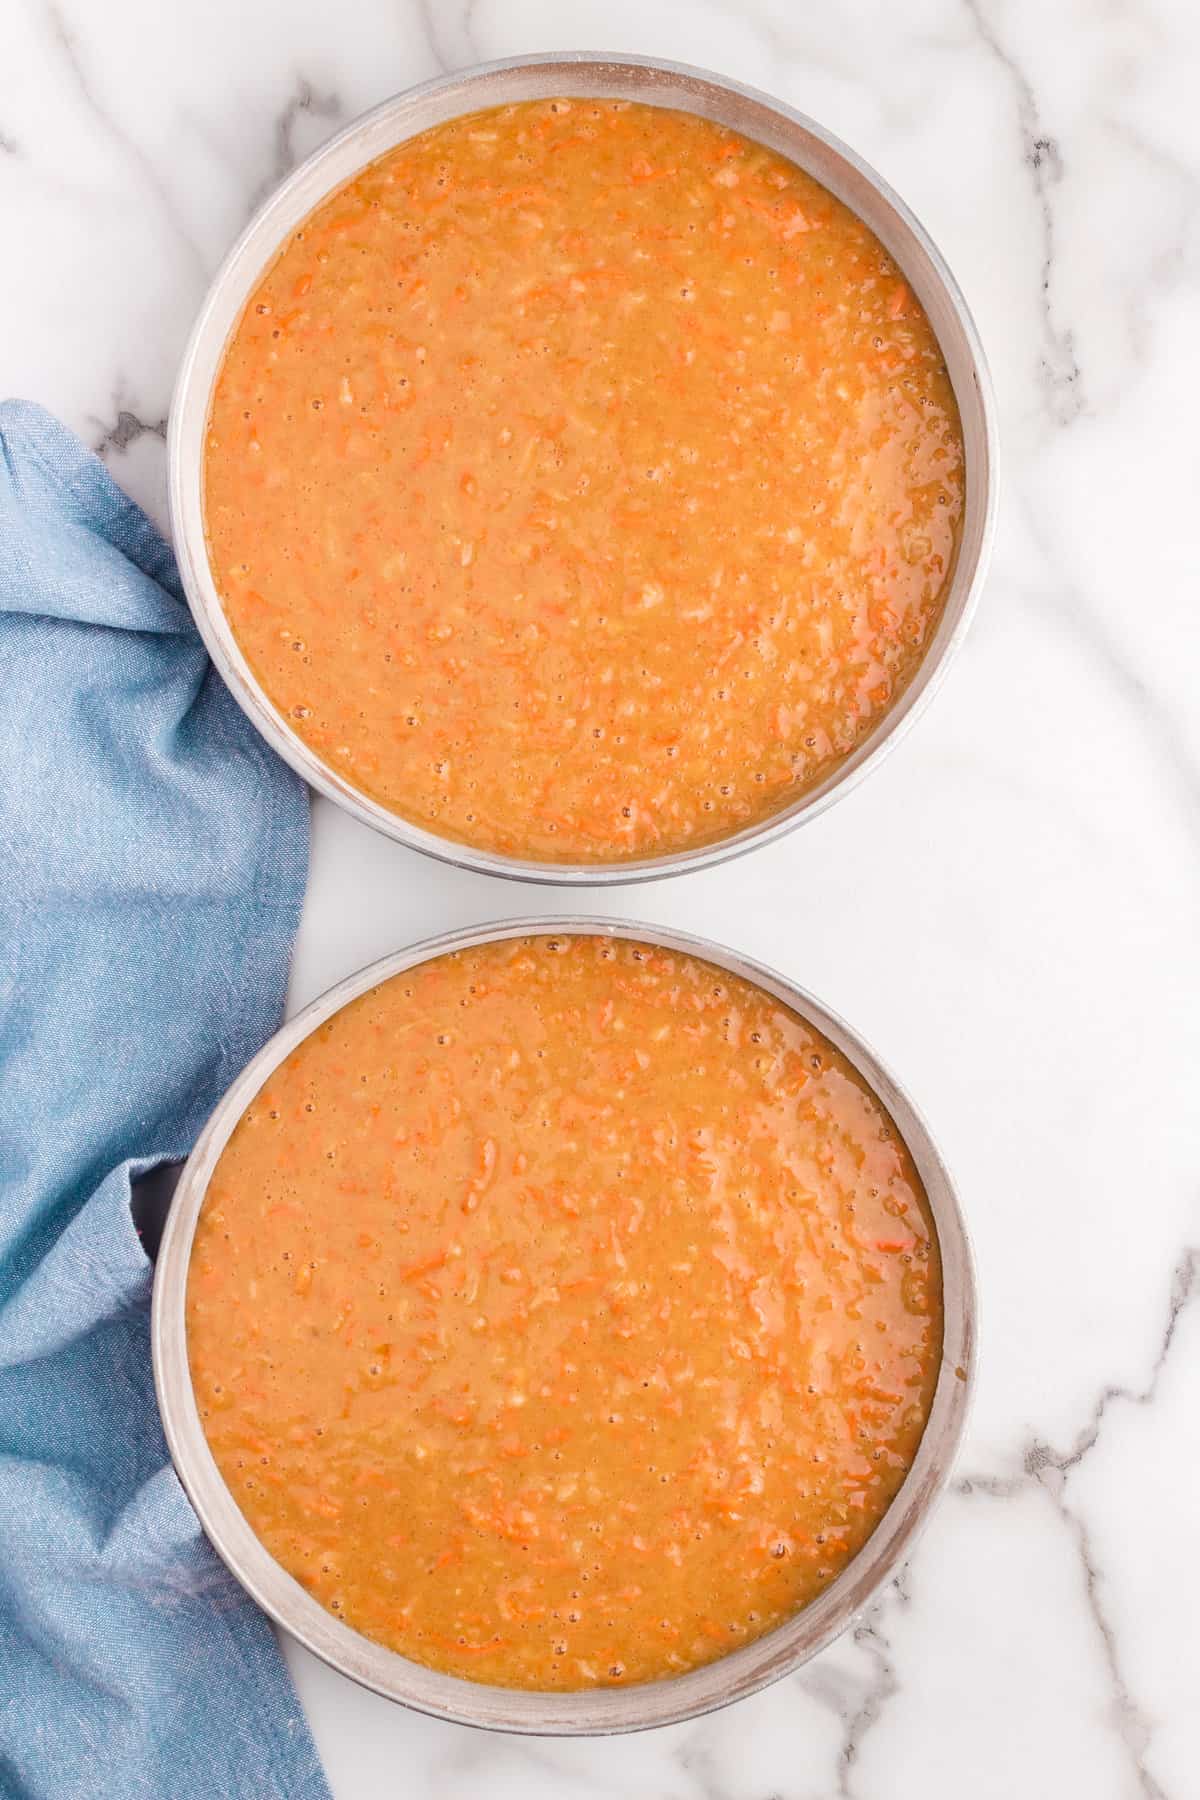 Pouring Carrot Cake Batter into Two Round Cake Pans